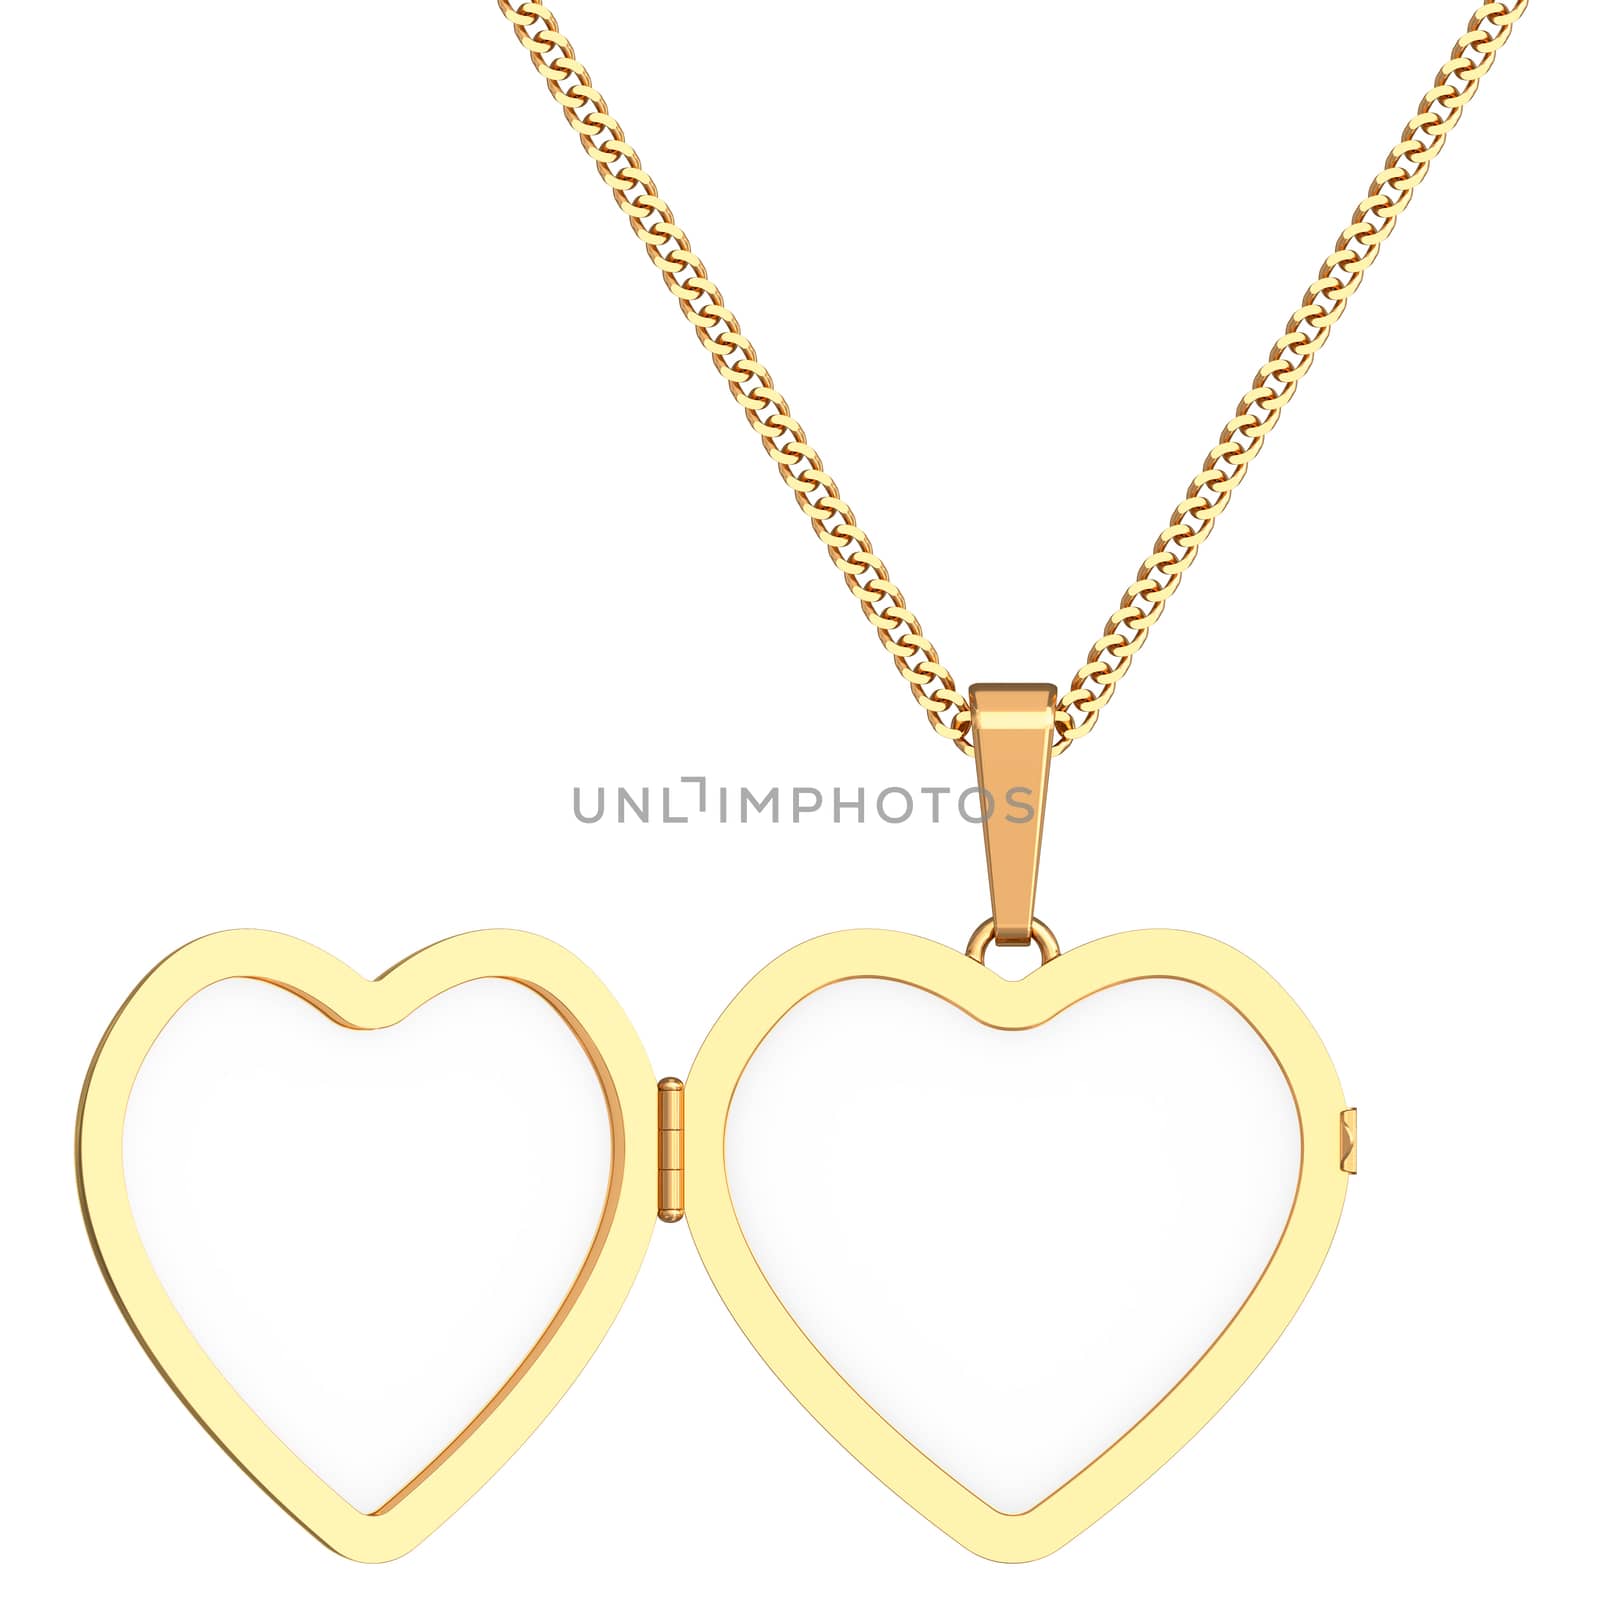 Gold heart shaped locket on chain isolated on white background. High resolution 3D image